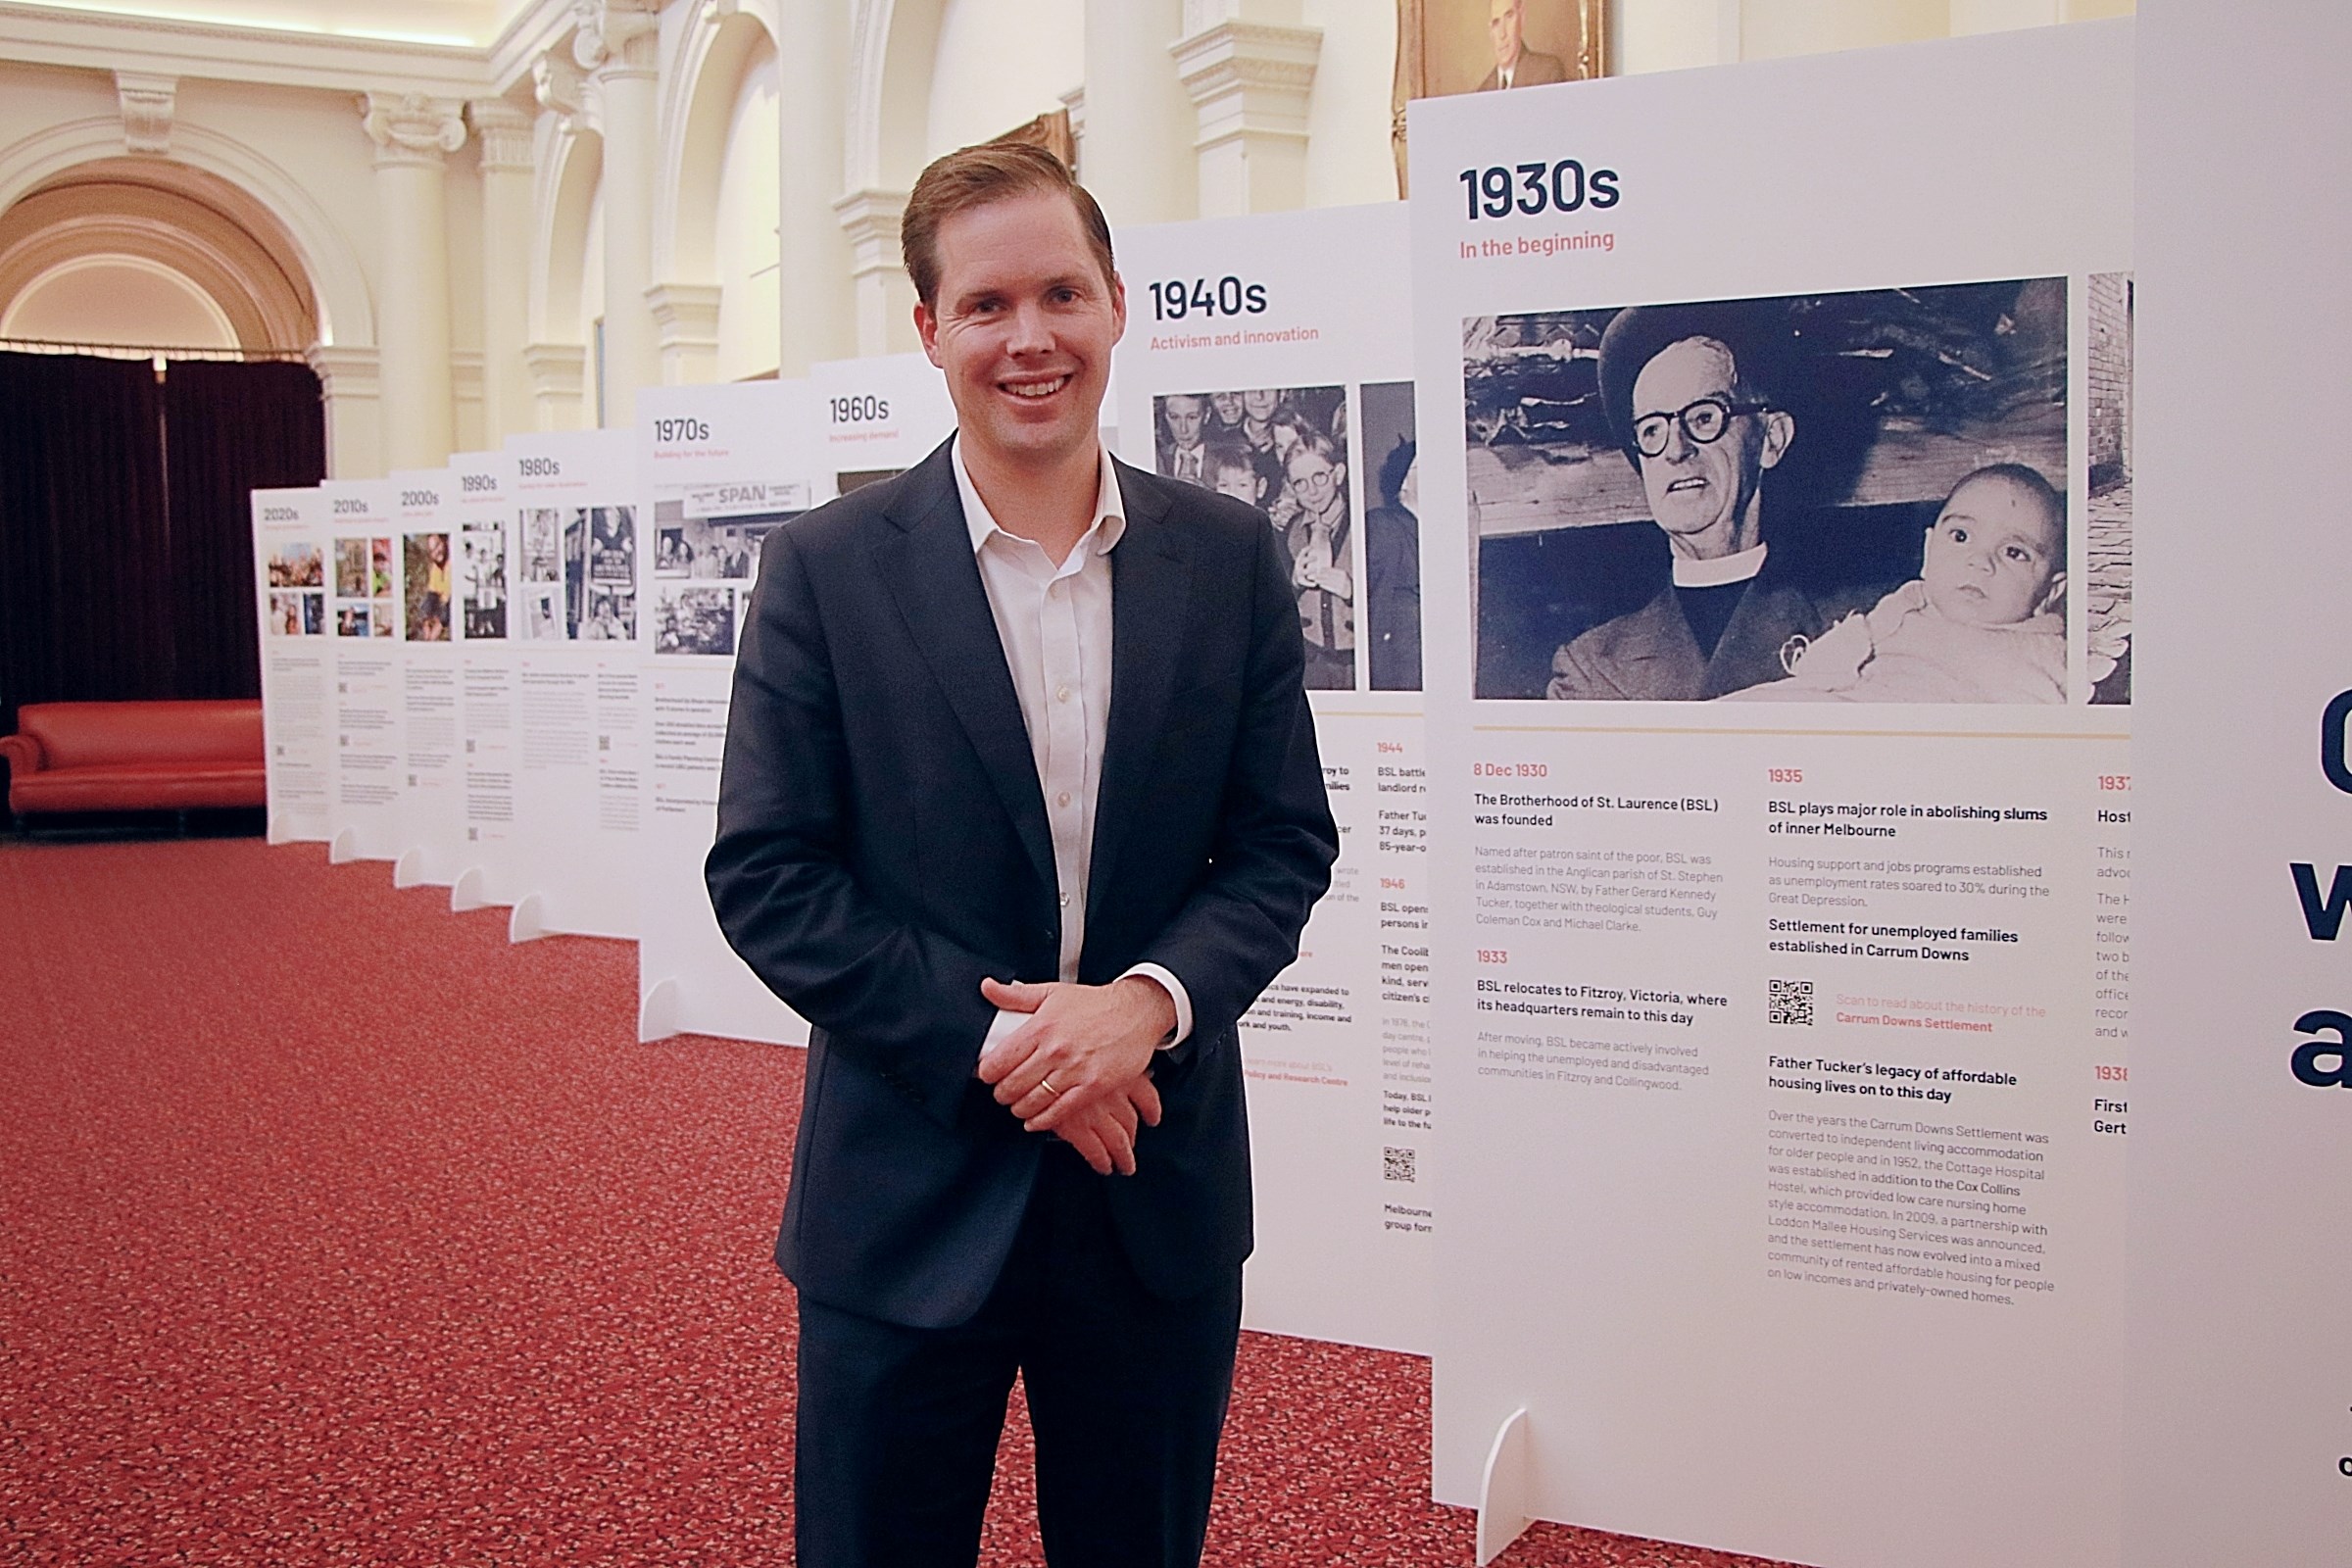 Exhibition highlights decades of help for Victorians in need 